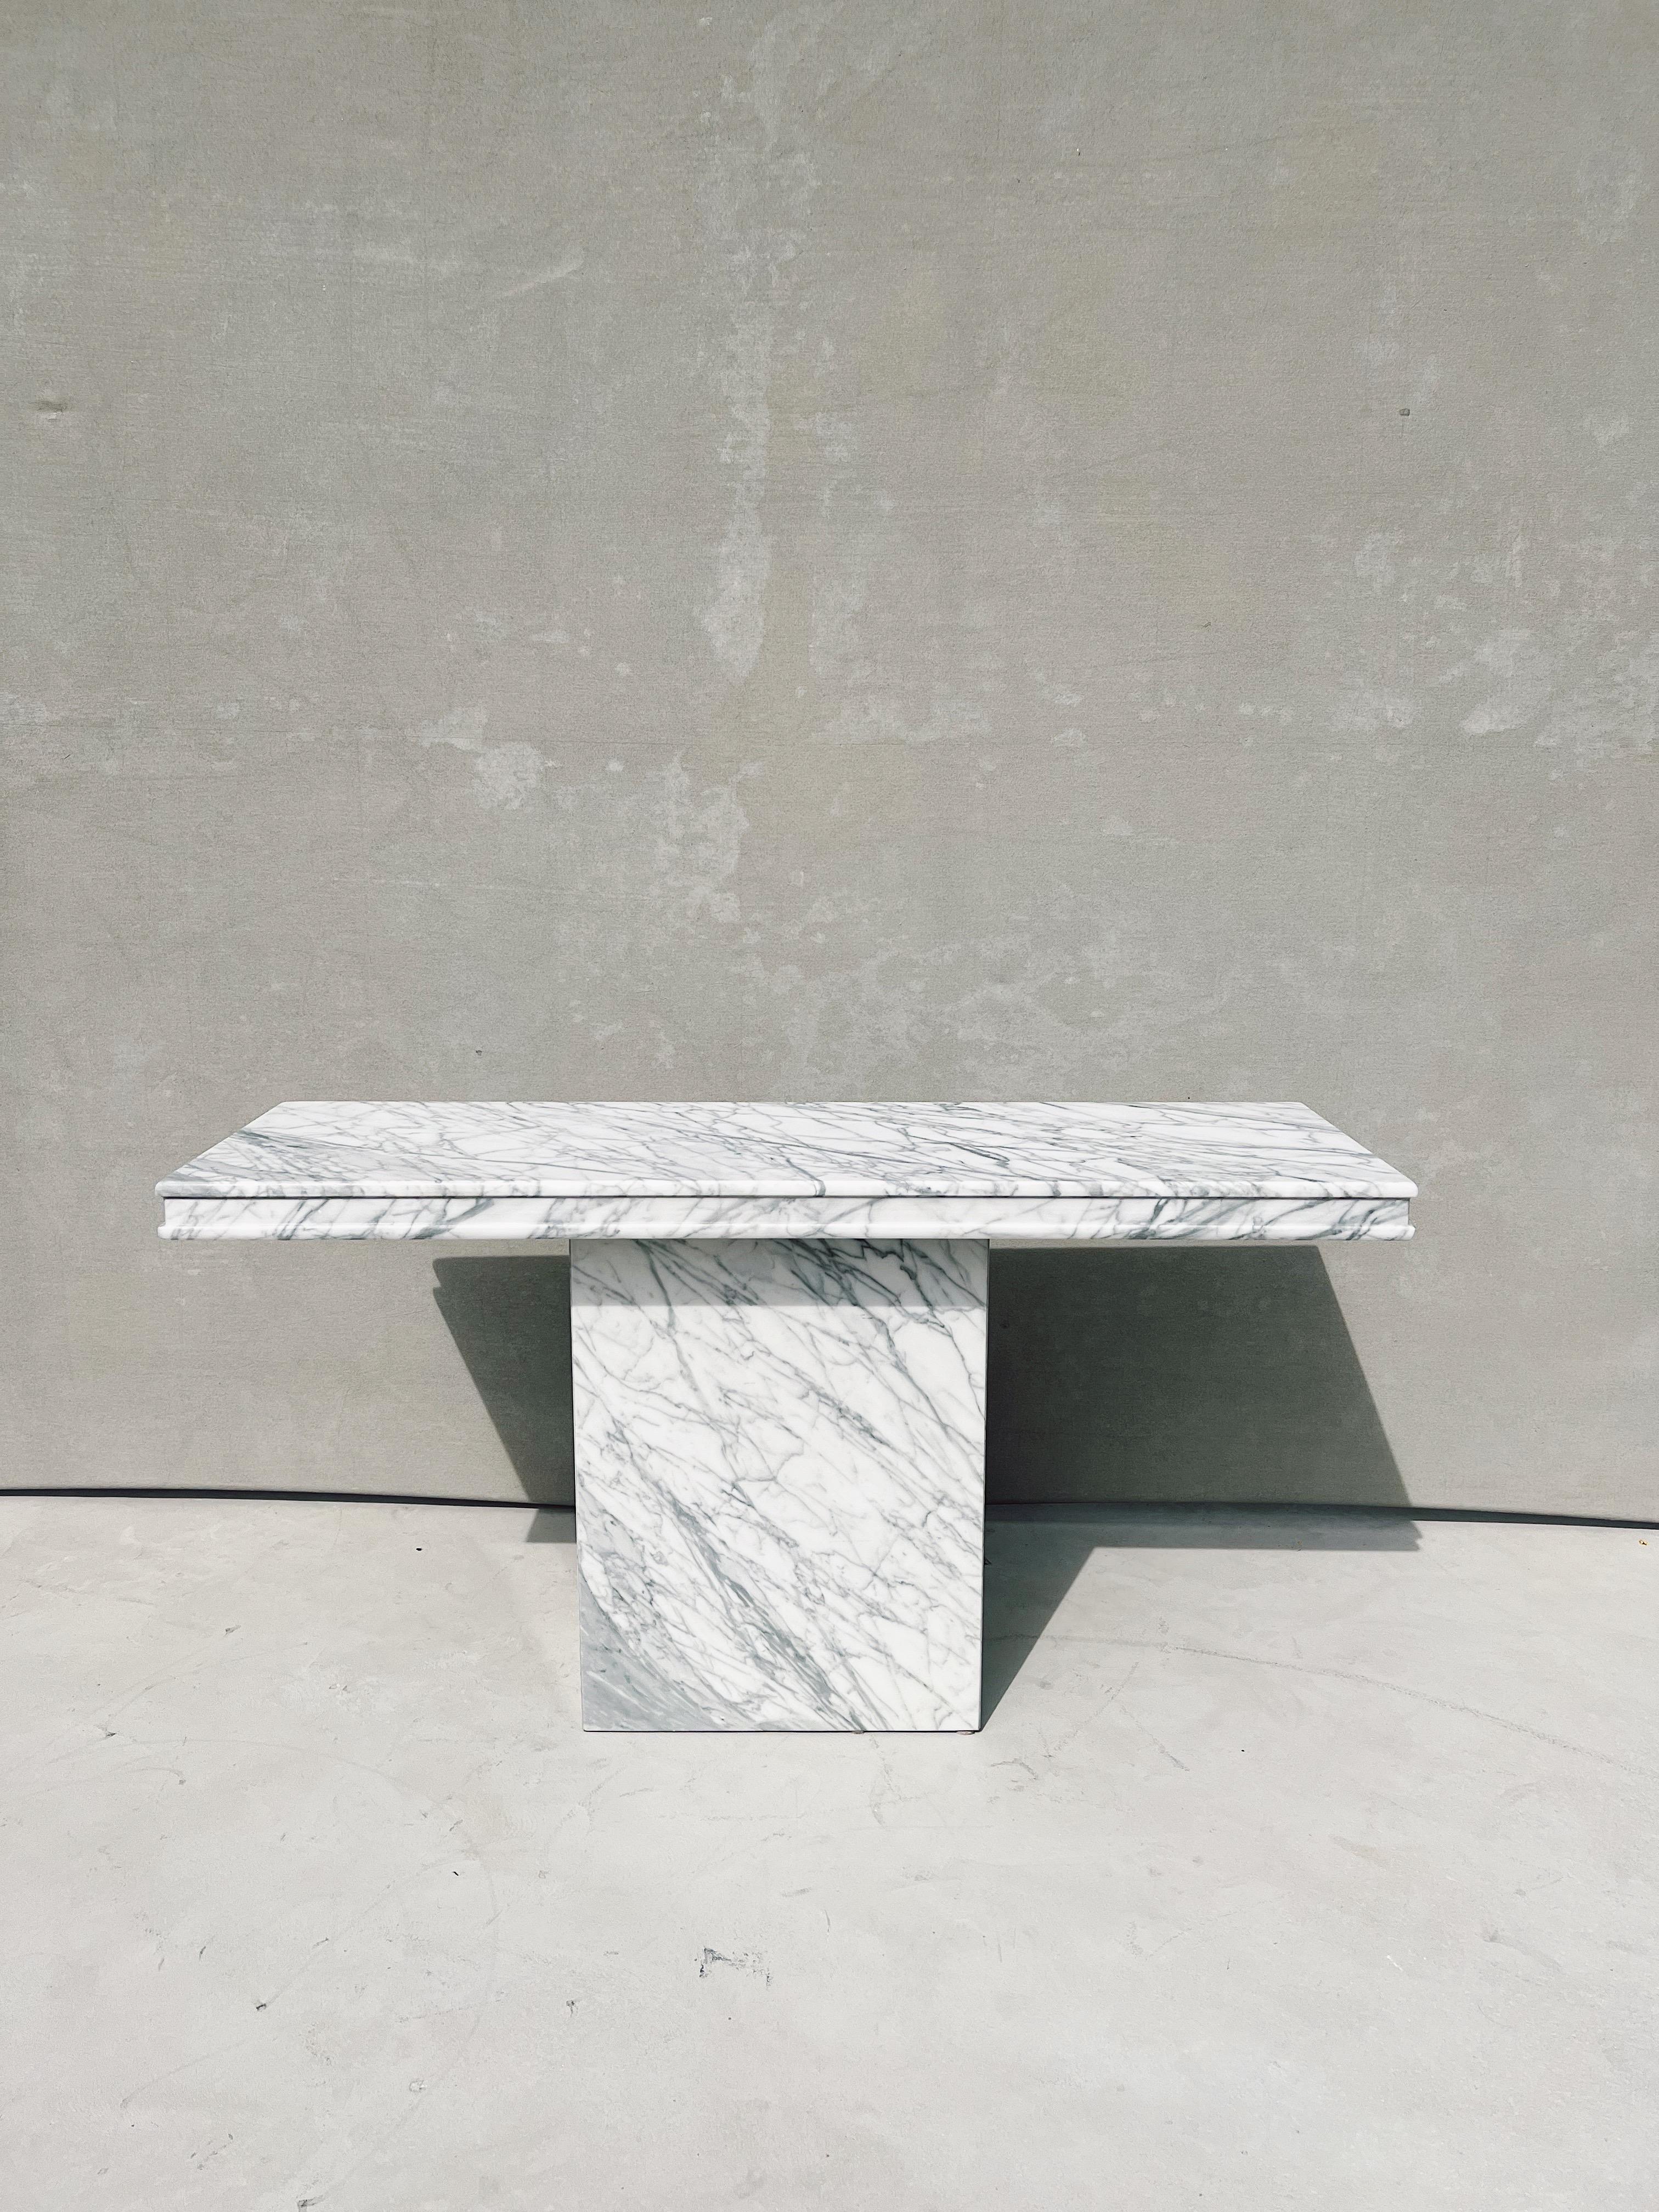 Vintage Italian Carrara marble rectangular console table

Carrara marble is one of the oldest marbles in the world. It is simple, sophisticated and elegant. It is sure to fit into whatever interior it is placed in. 

Designed and created in the